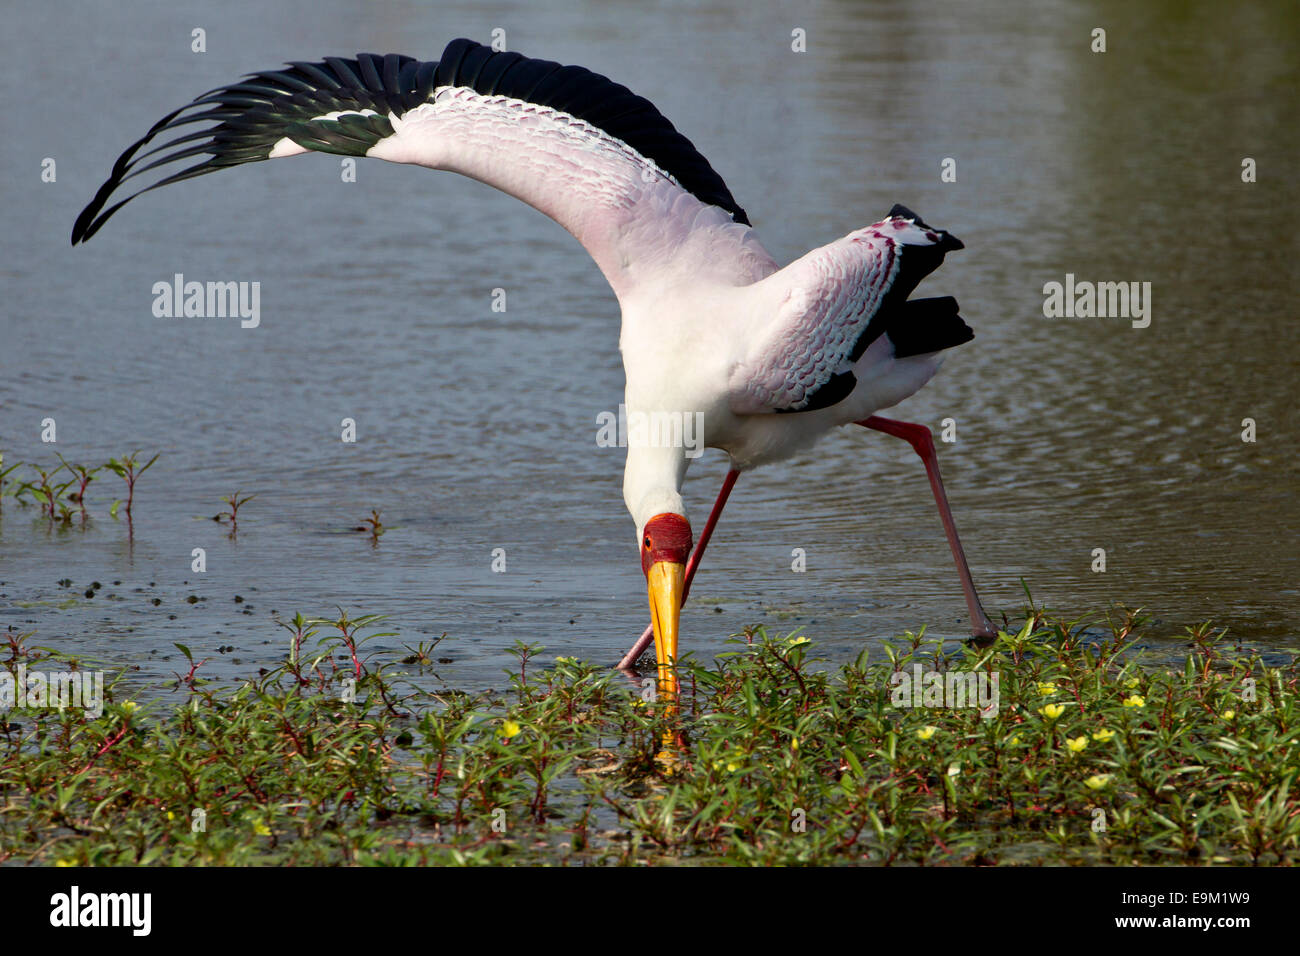 Yellow-billed stork feeding, with one wing stretched out for balance Stock Photo